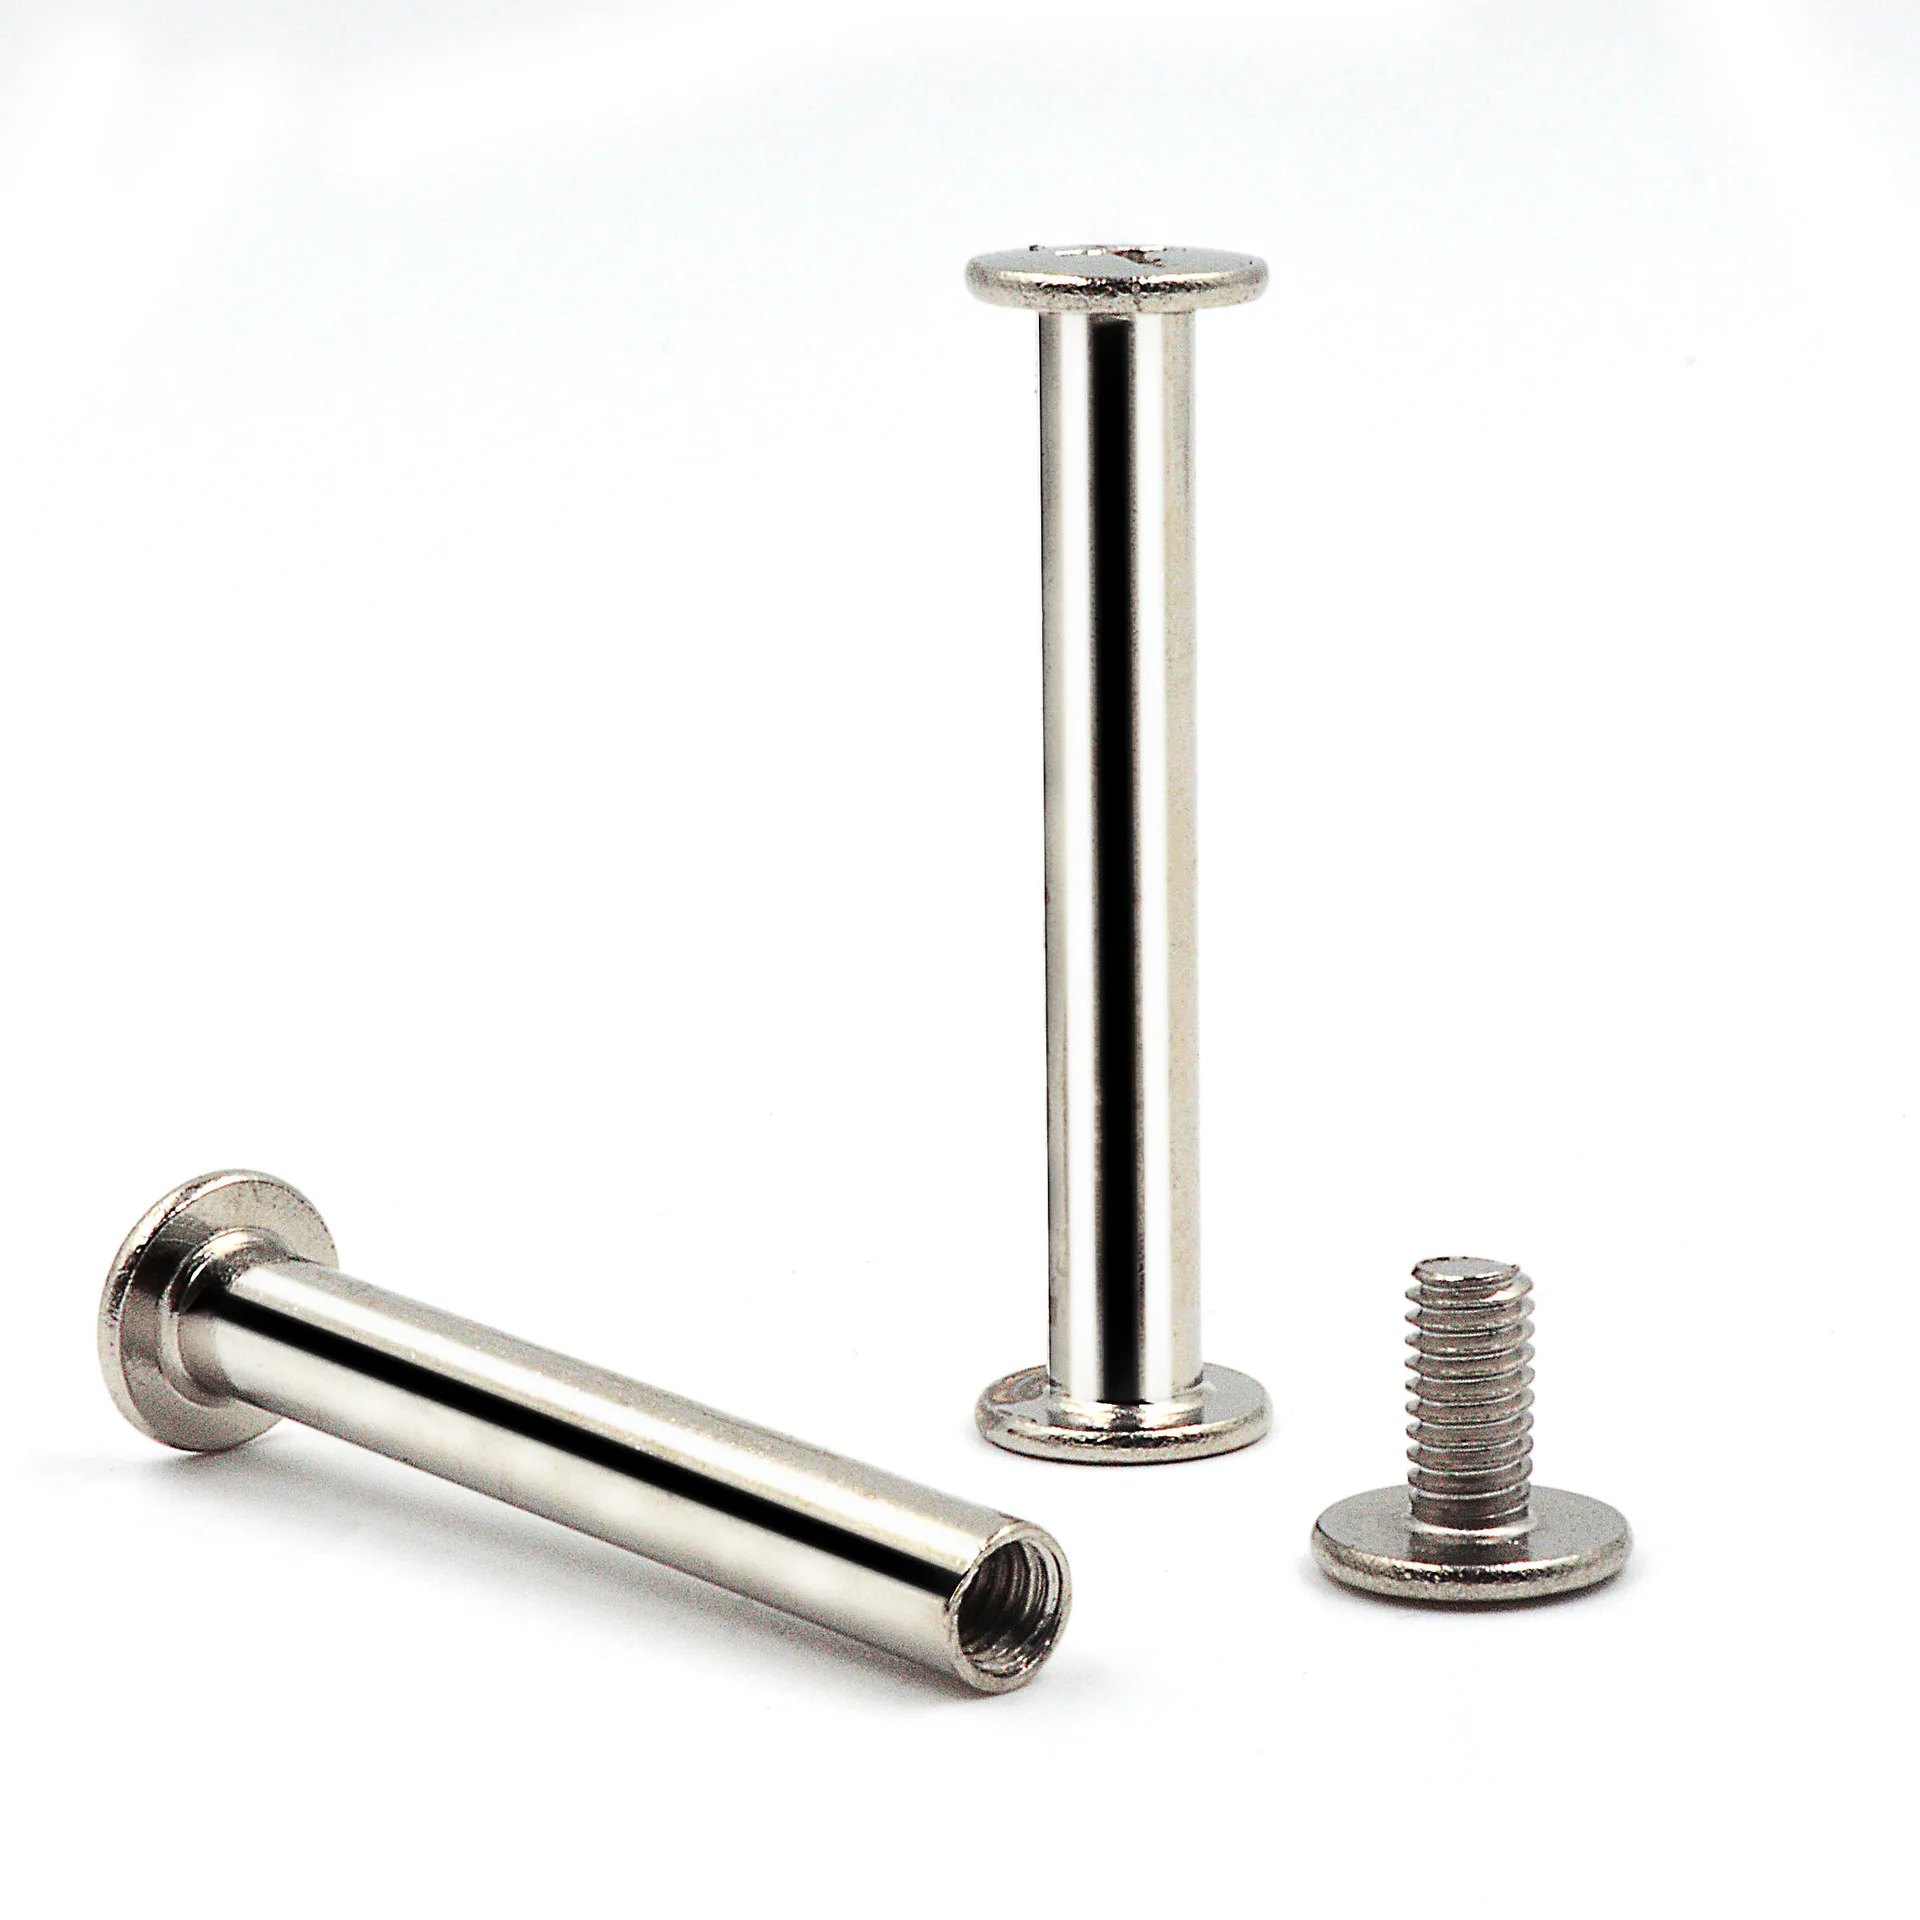 Nickel Plated' 4 x 5 mm Chicago Screw